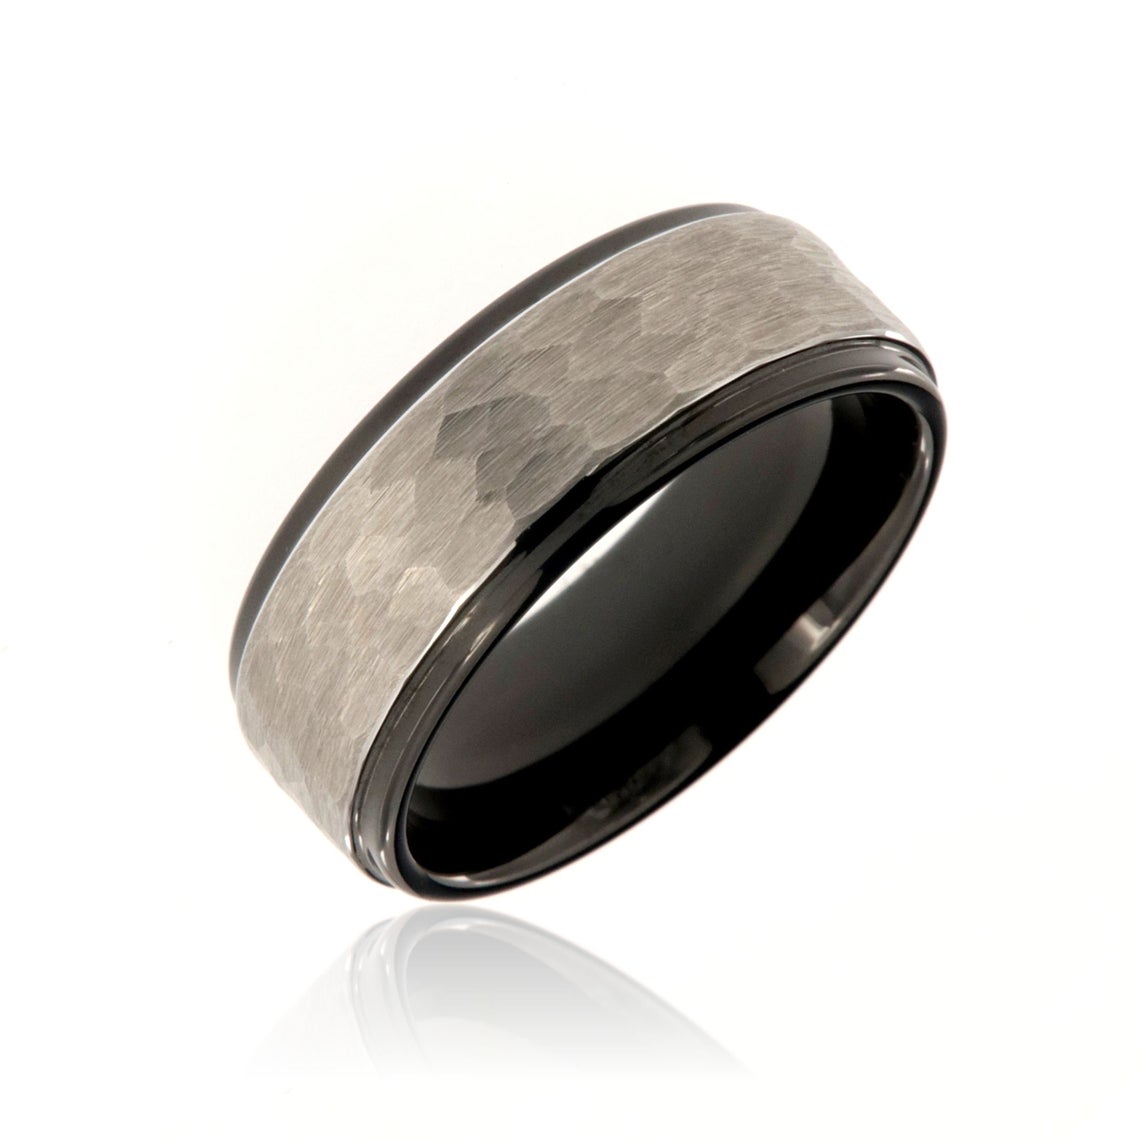 8mm wide tungsten ring with a silver-like hammered center and grooved edges